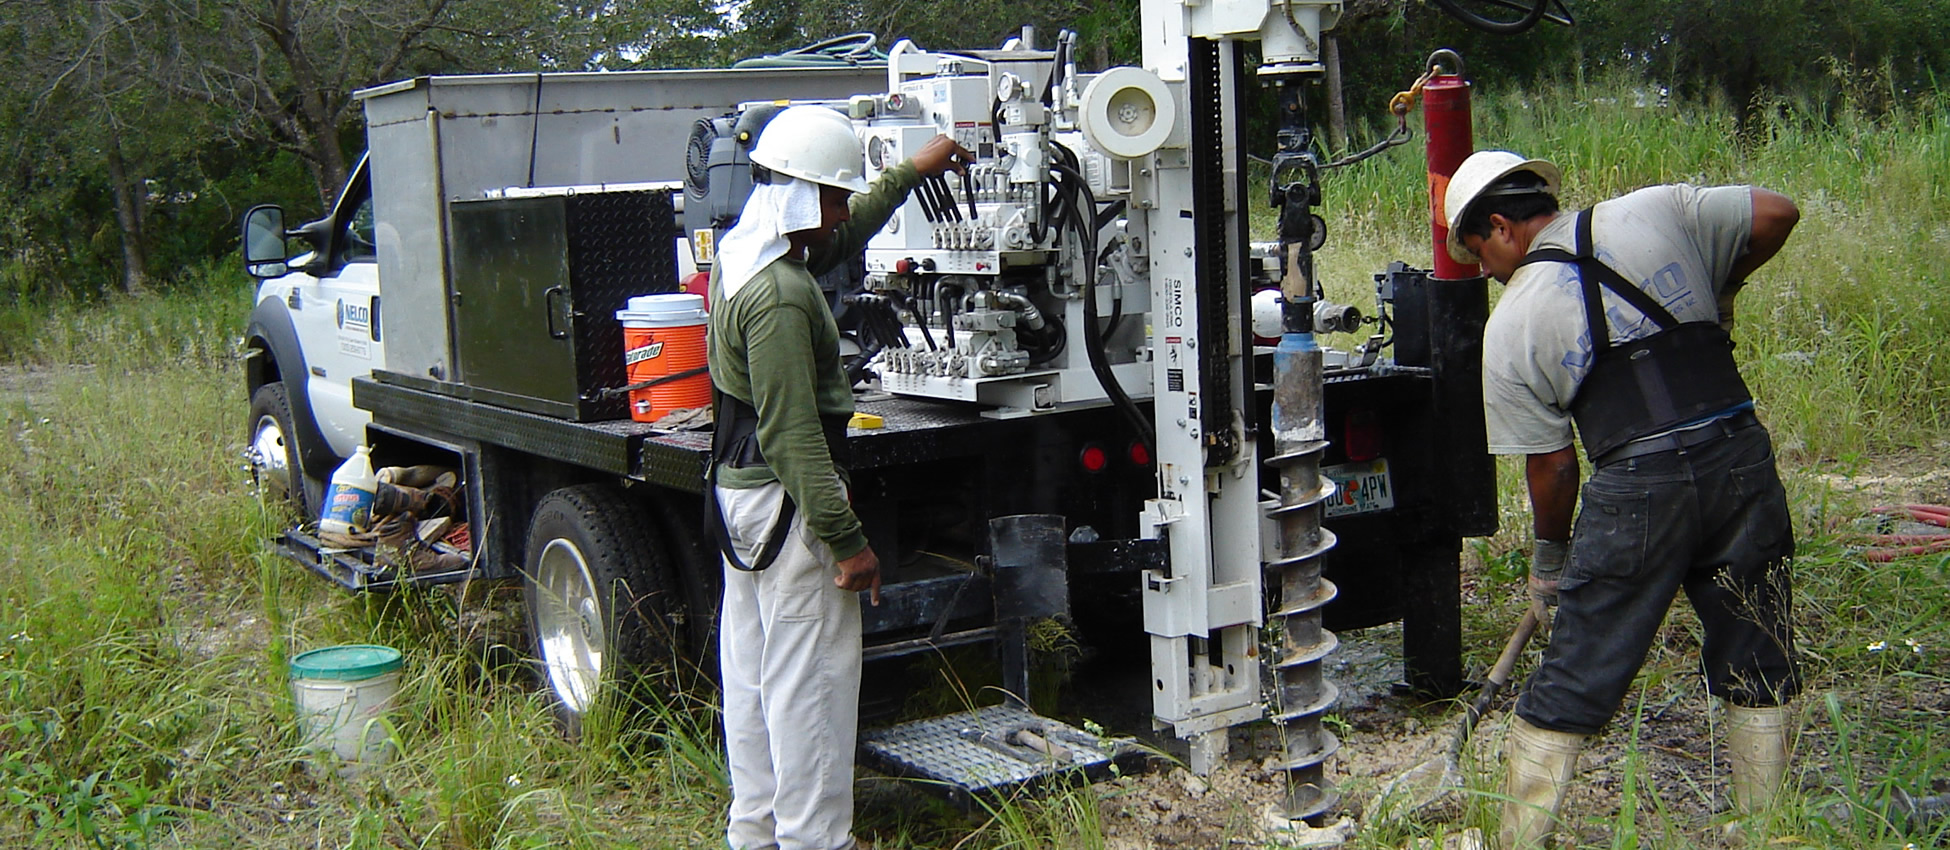 We specialize in geotechnical services